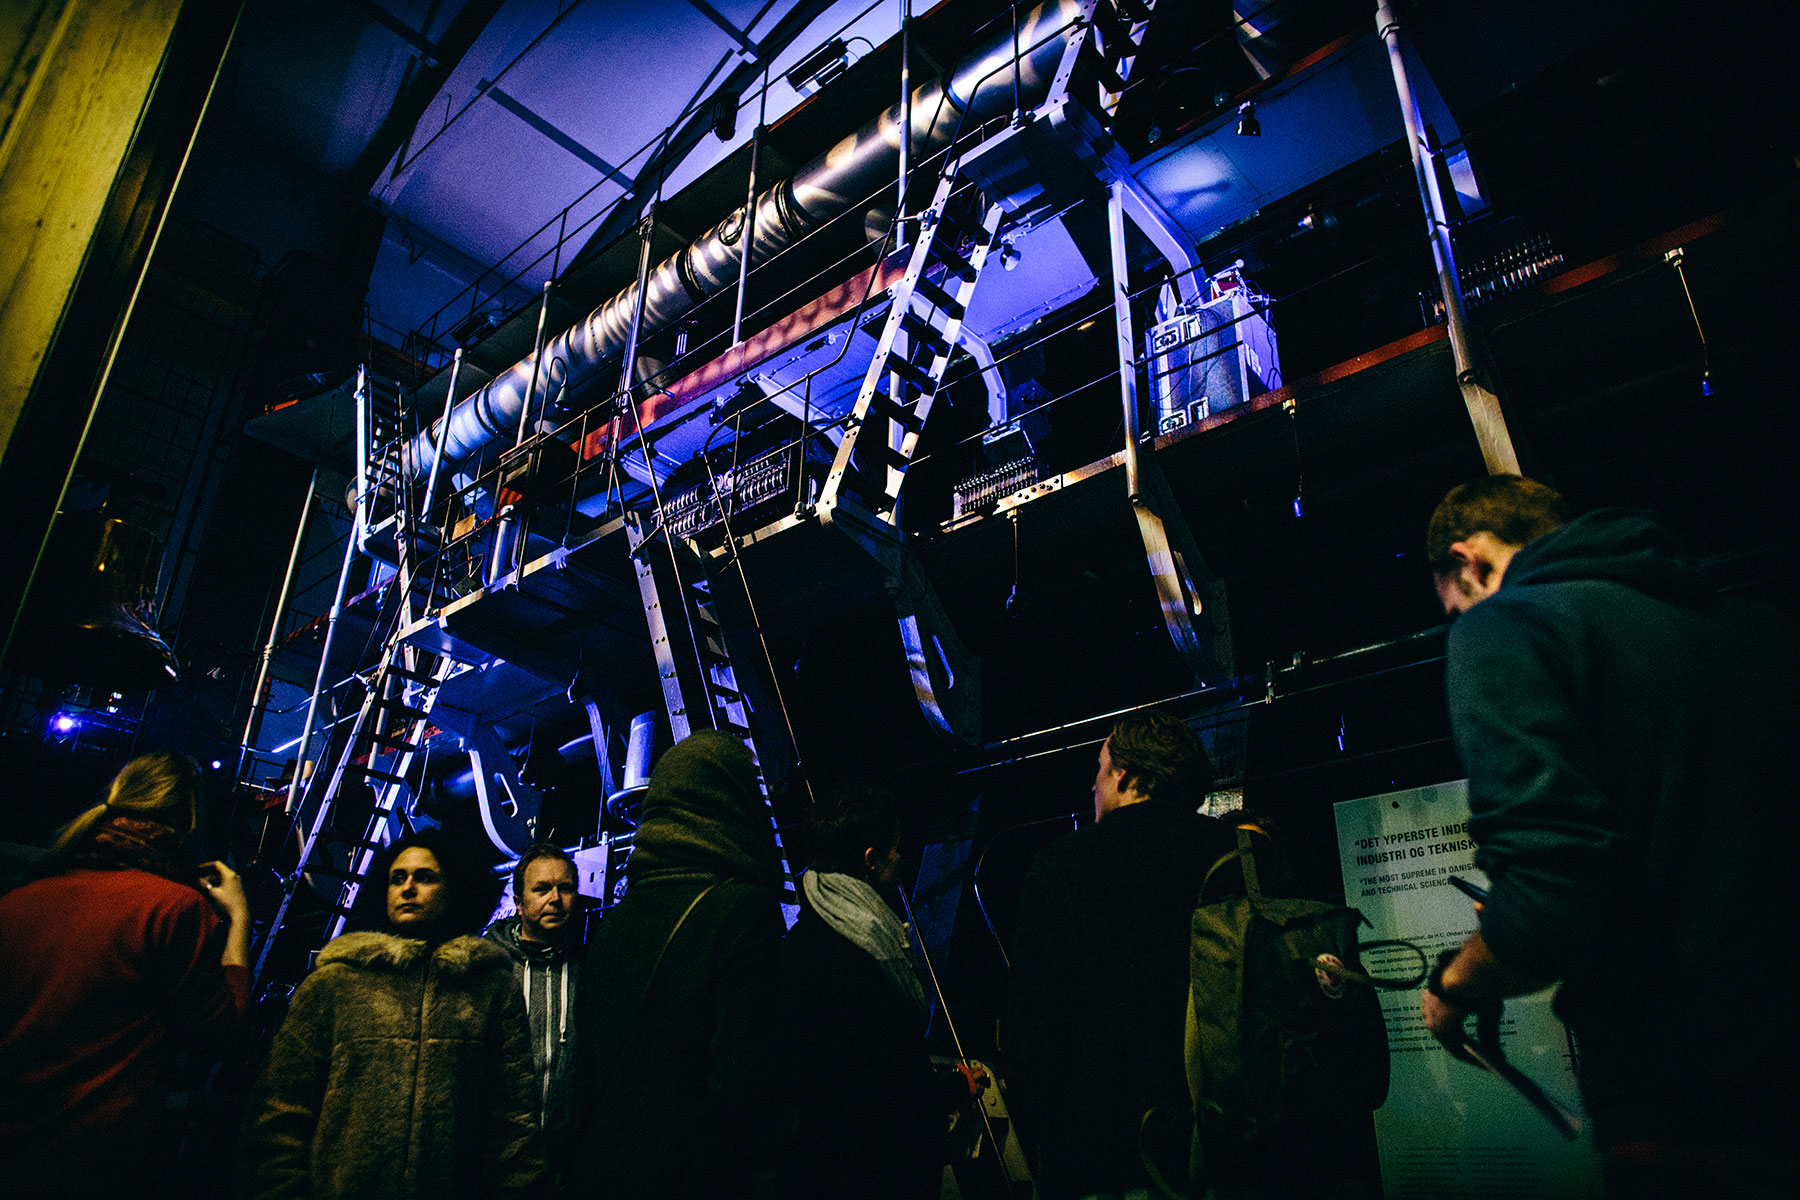 Picture from FROST festival 2013. Efterklang playing live at the museum Dieselhouse, which contains the worlds largest dieselmotor! Supported by We Like We